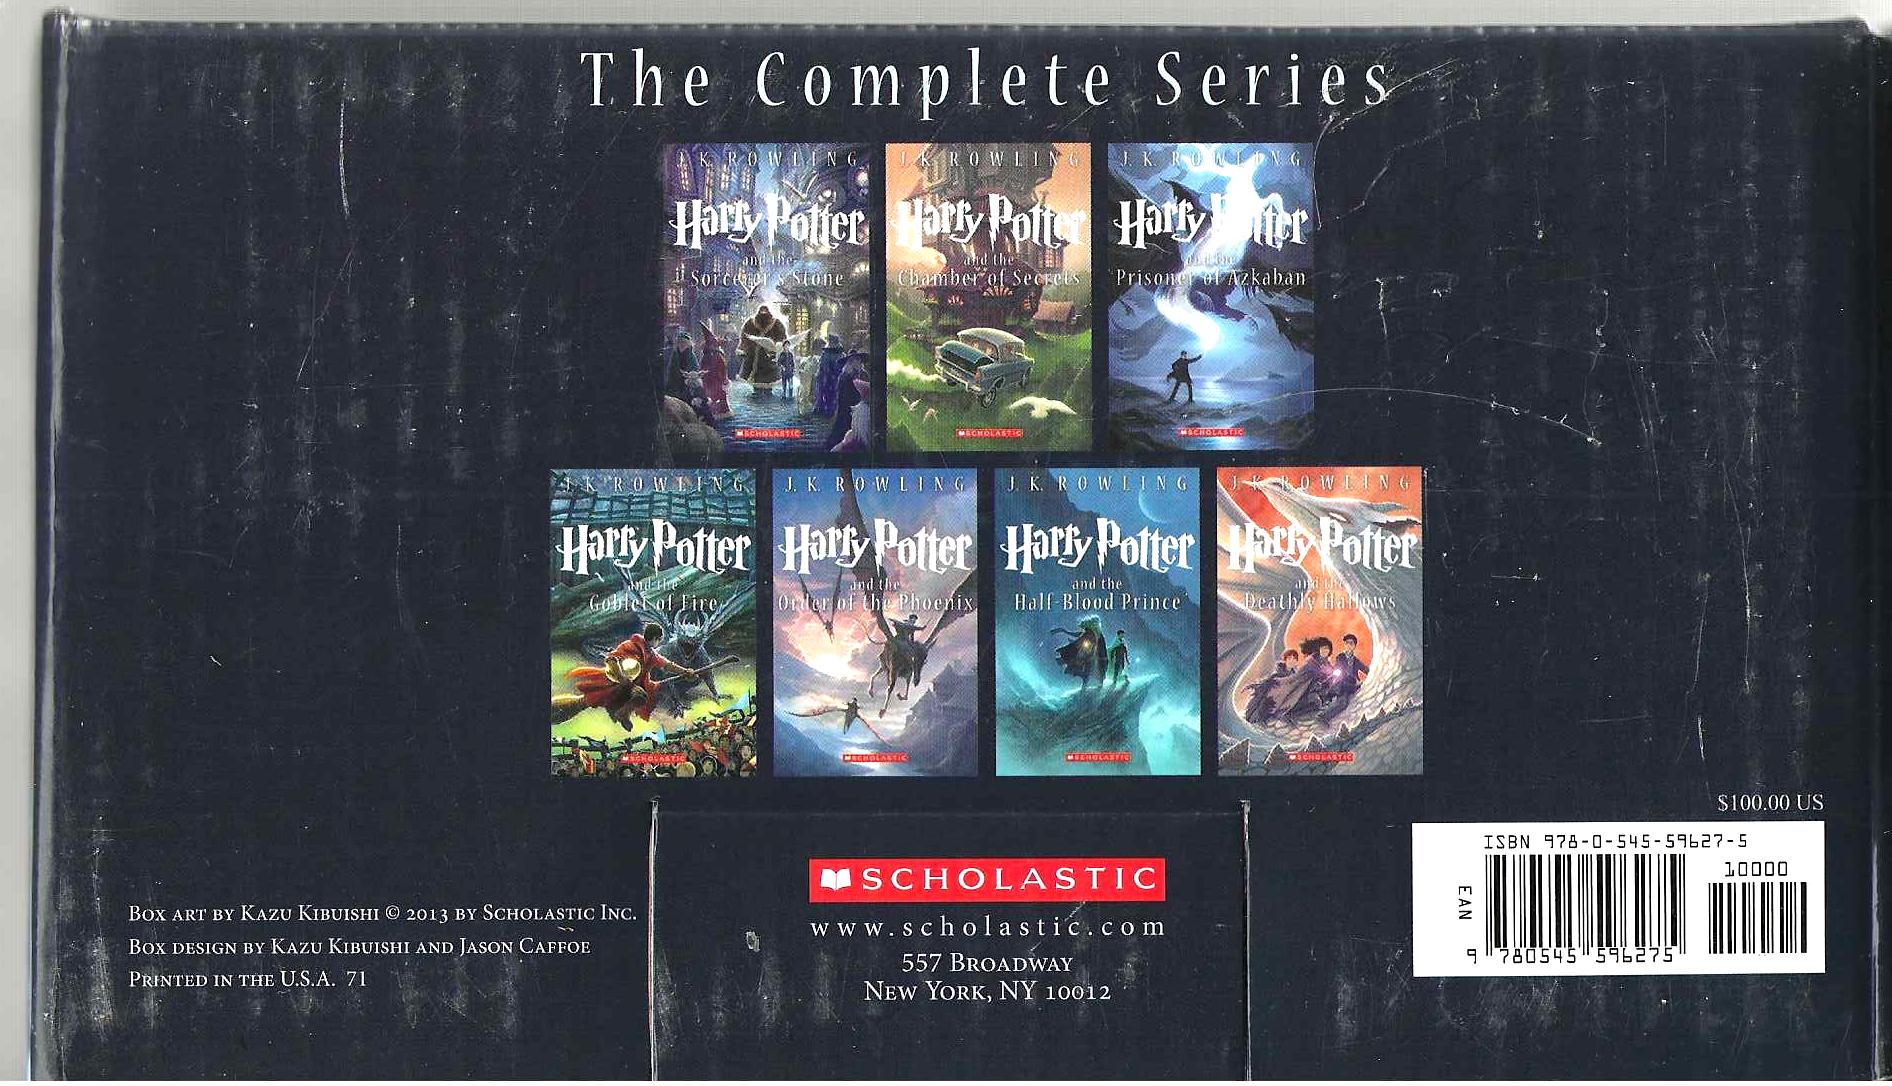 Harry Potter The Complete Series Slip Case ONLY by J. K. Rowling on Black's  Bookshop